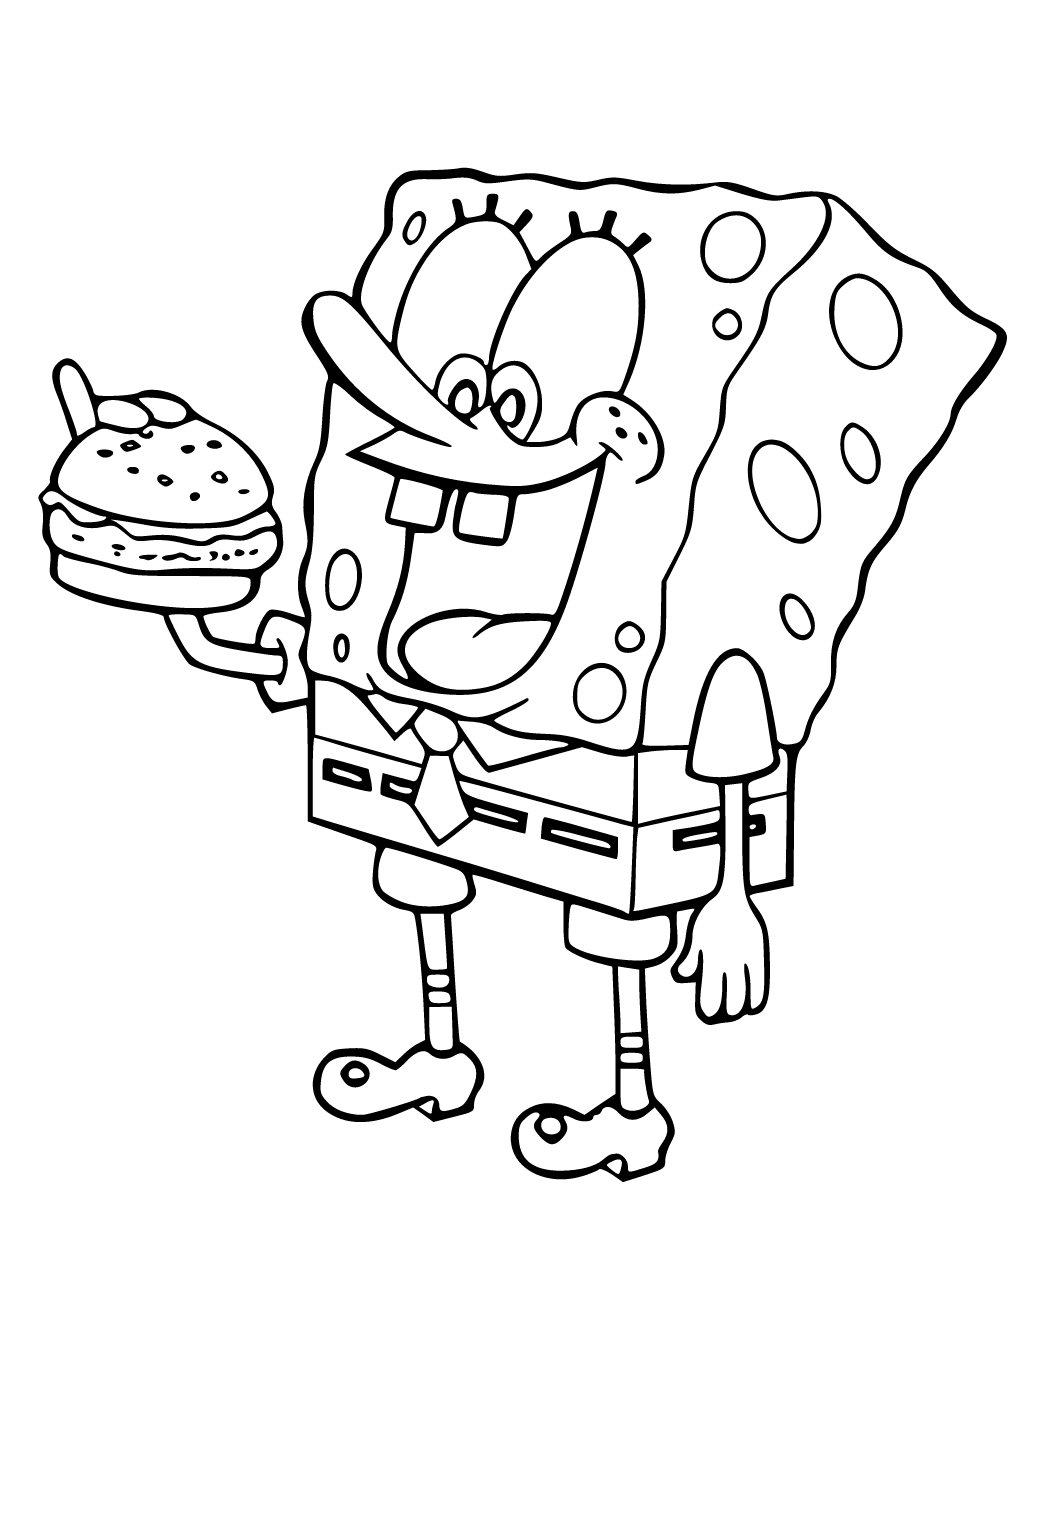 spongebob coloring pages for girls